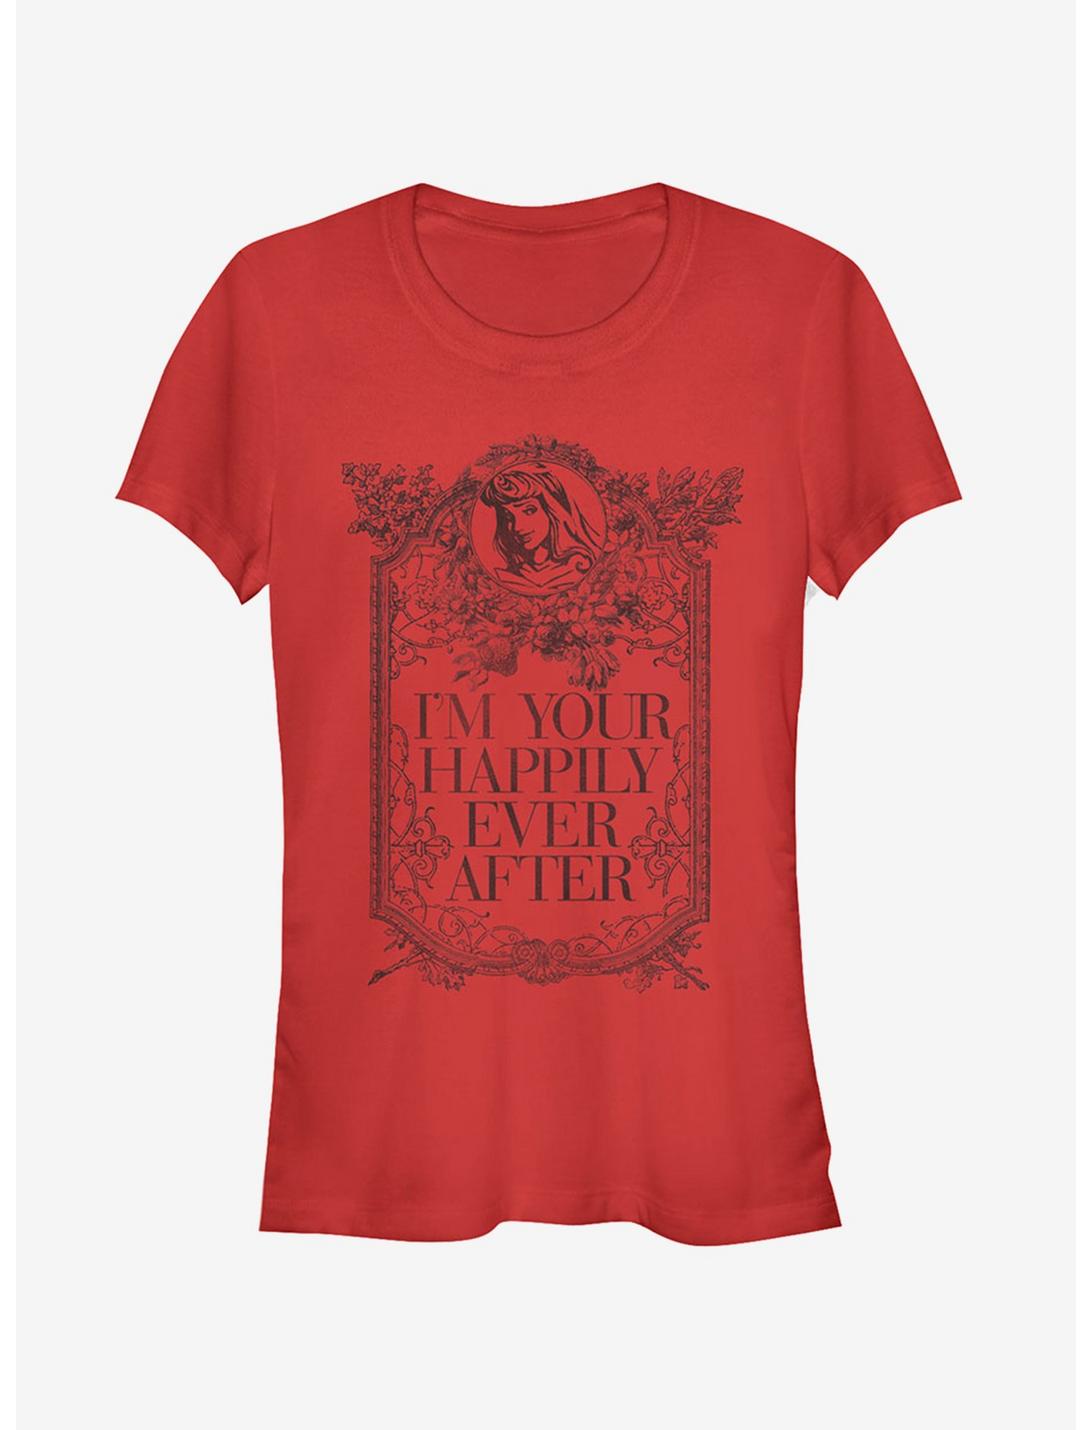 Disney Happily Ever After Girls T-Shirt, RED, hi-res